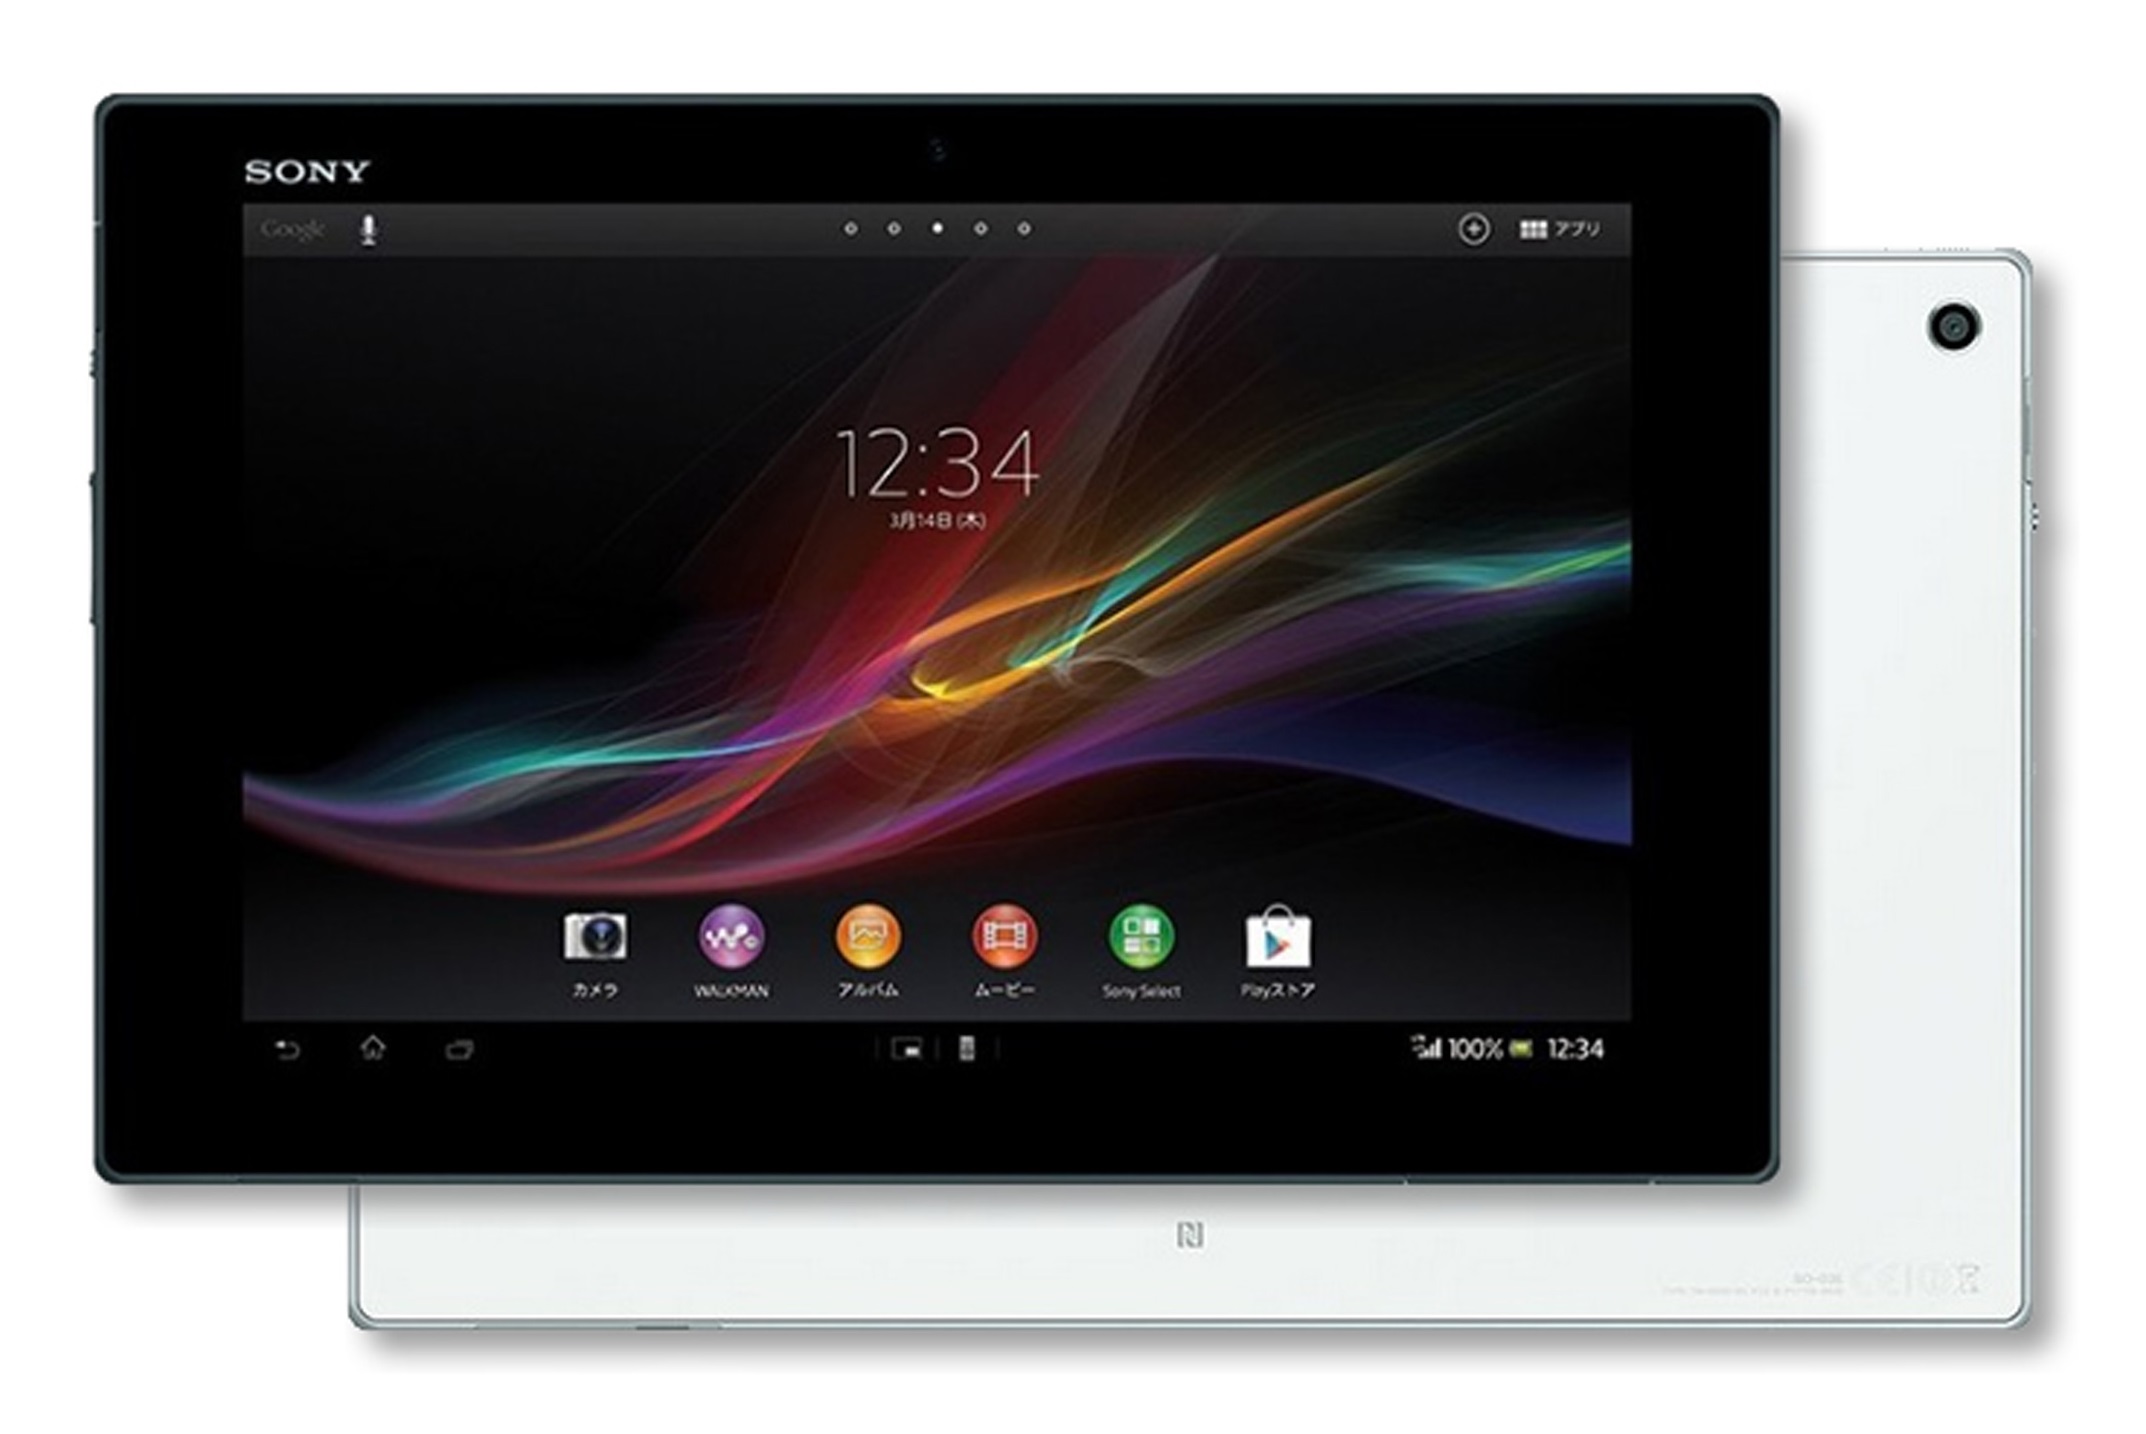 Sony Xperia Tablet Z Full Tablet Specifications, Comparison